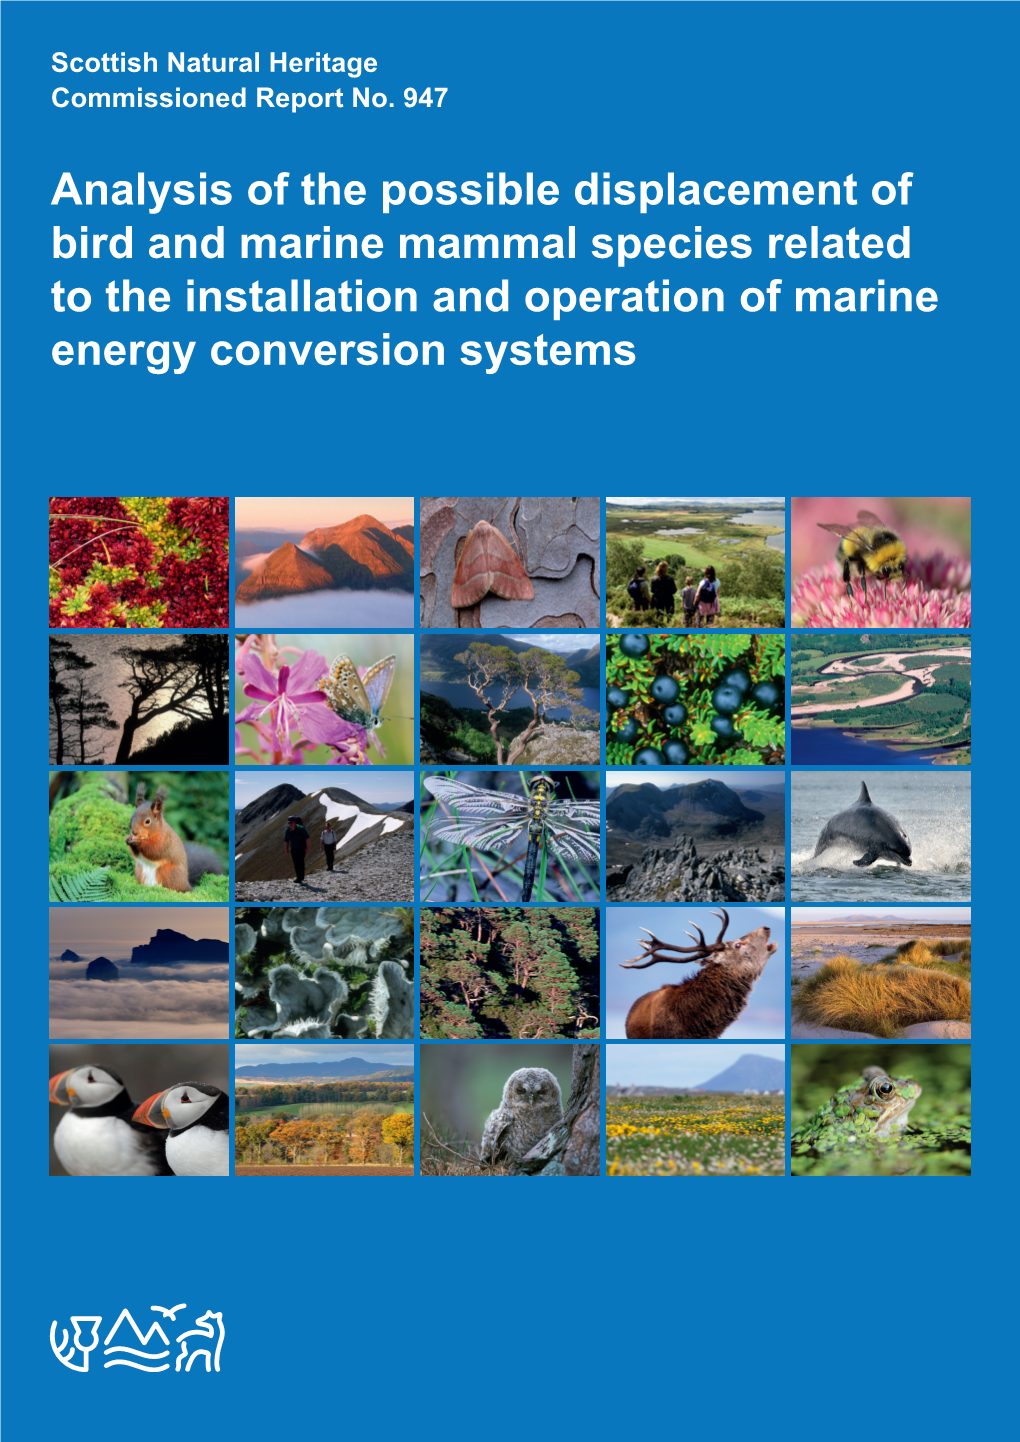 Analysis of the Possible Displacement of Bird and Marine Mammal Species Related to the Installation and Operation of Marine Energy Conversion Systems